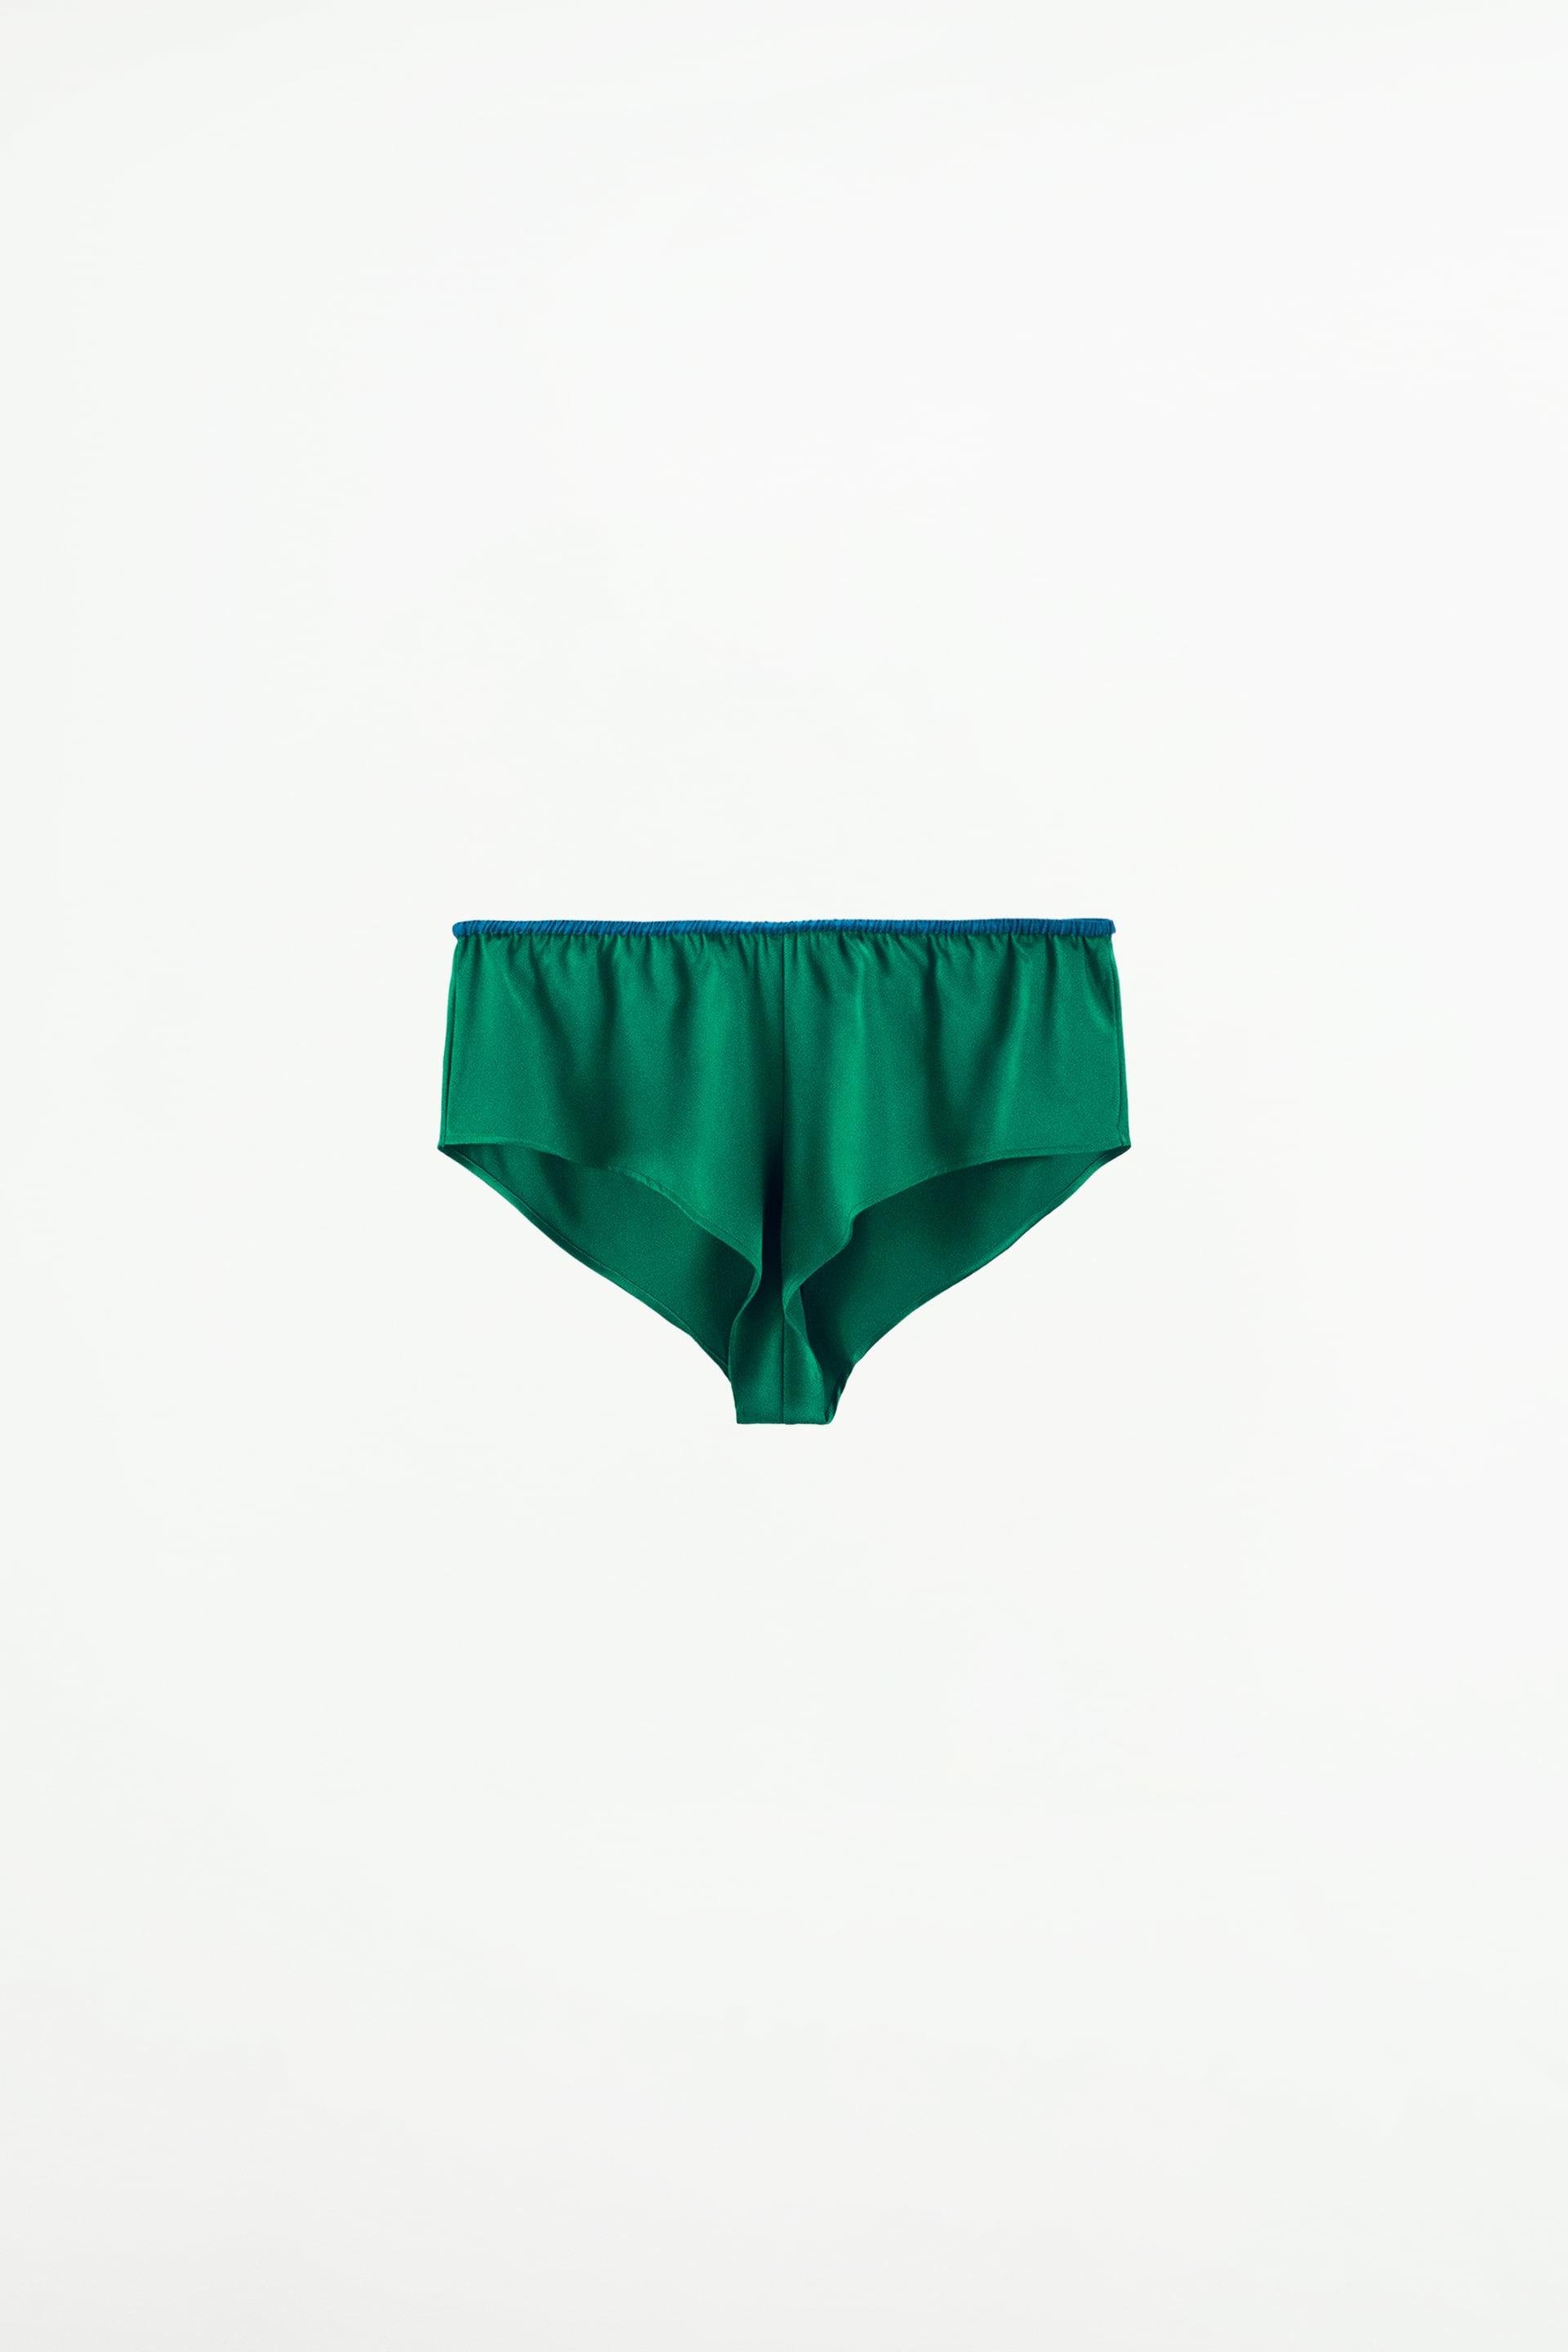 SATIN EFFECT SHORTS LIMITED EDITION by ZARA